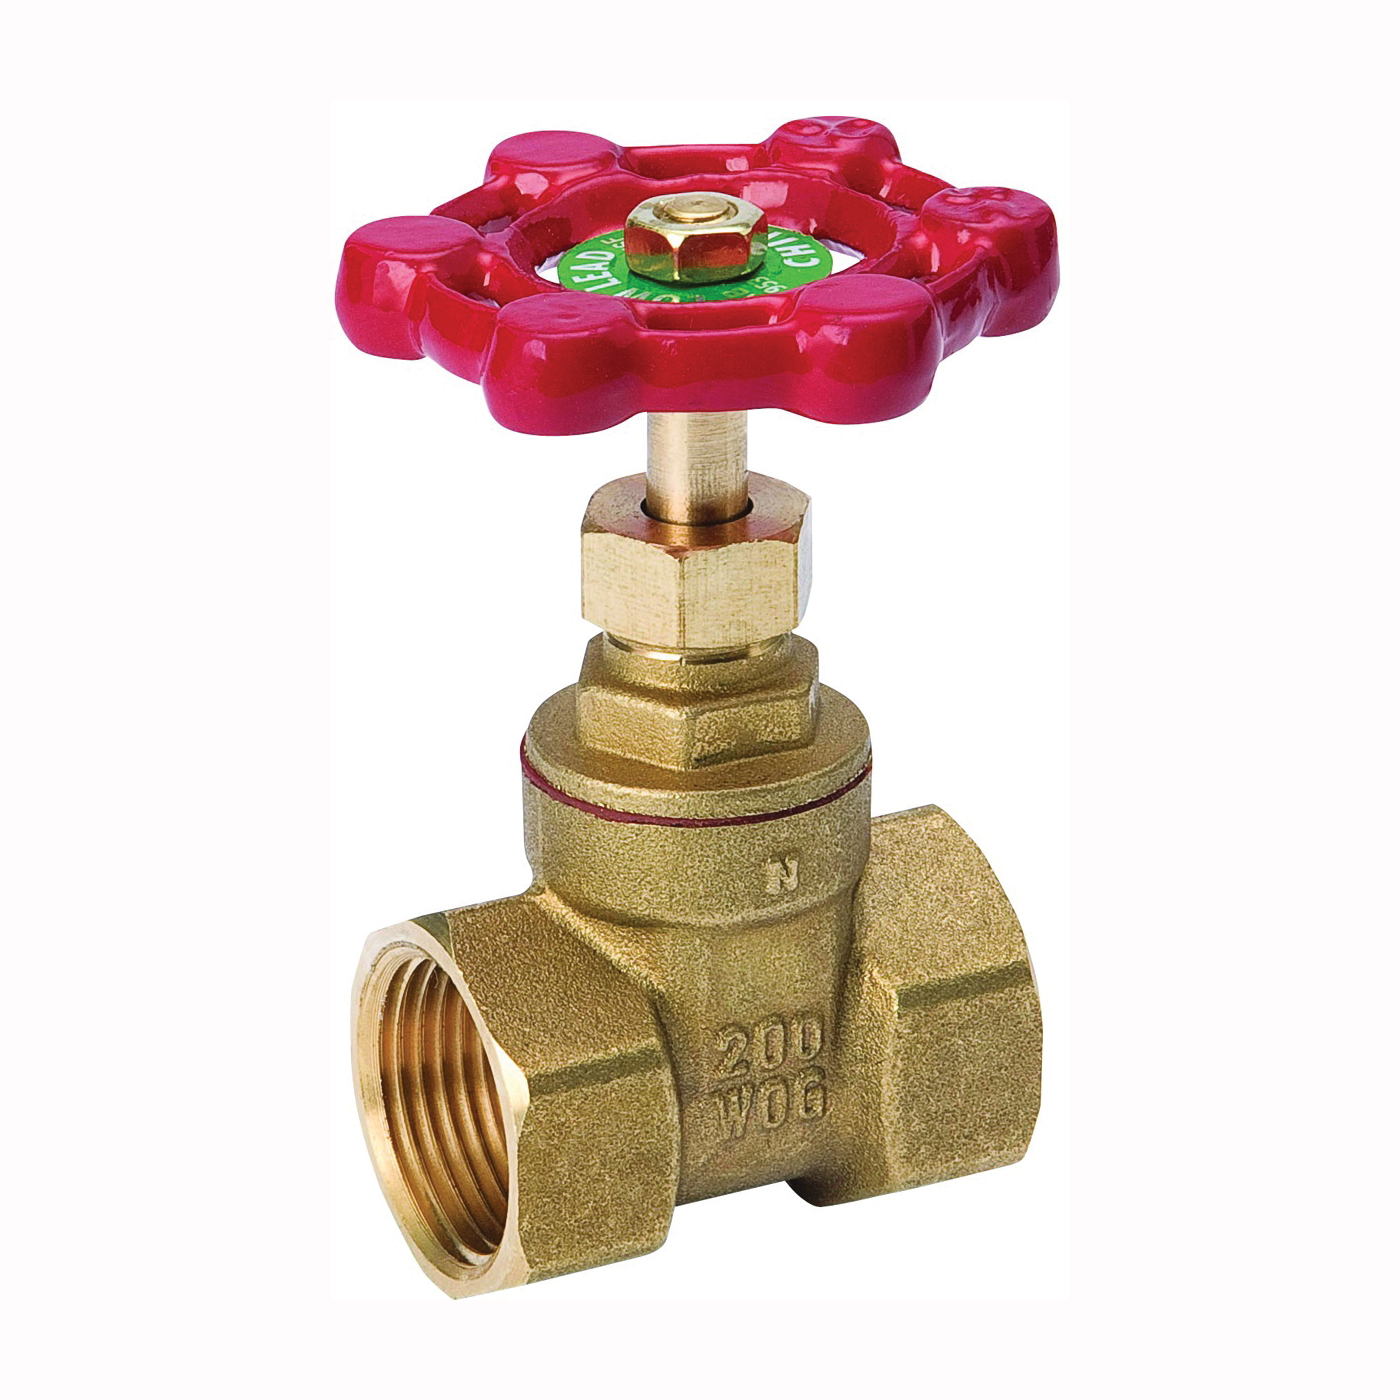 ProLine Series 100-408HC Gate Valve, 2 in Connection, FPT, 200/125 psi Pressure, Brass Body